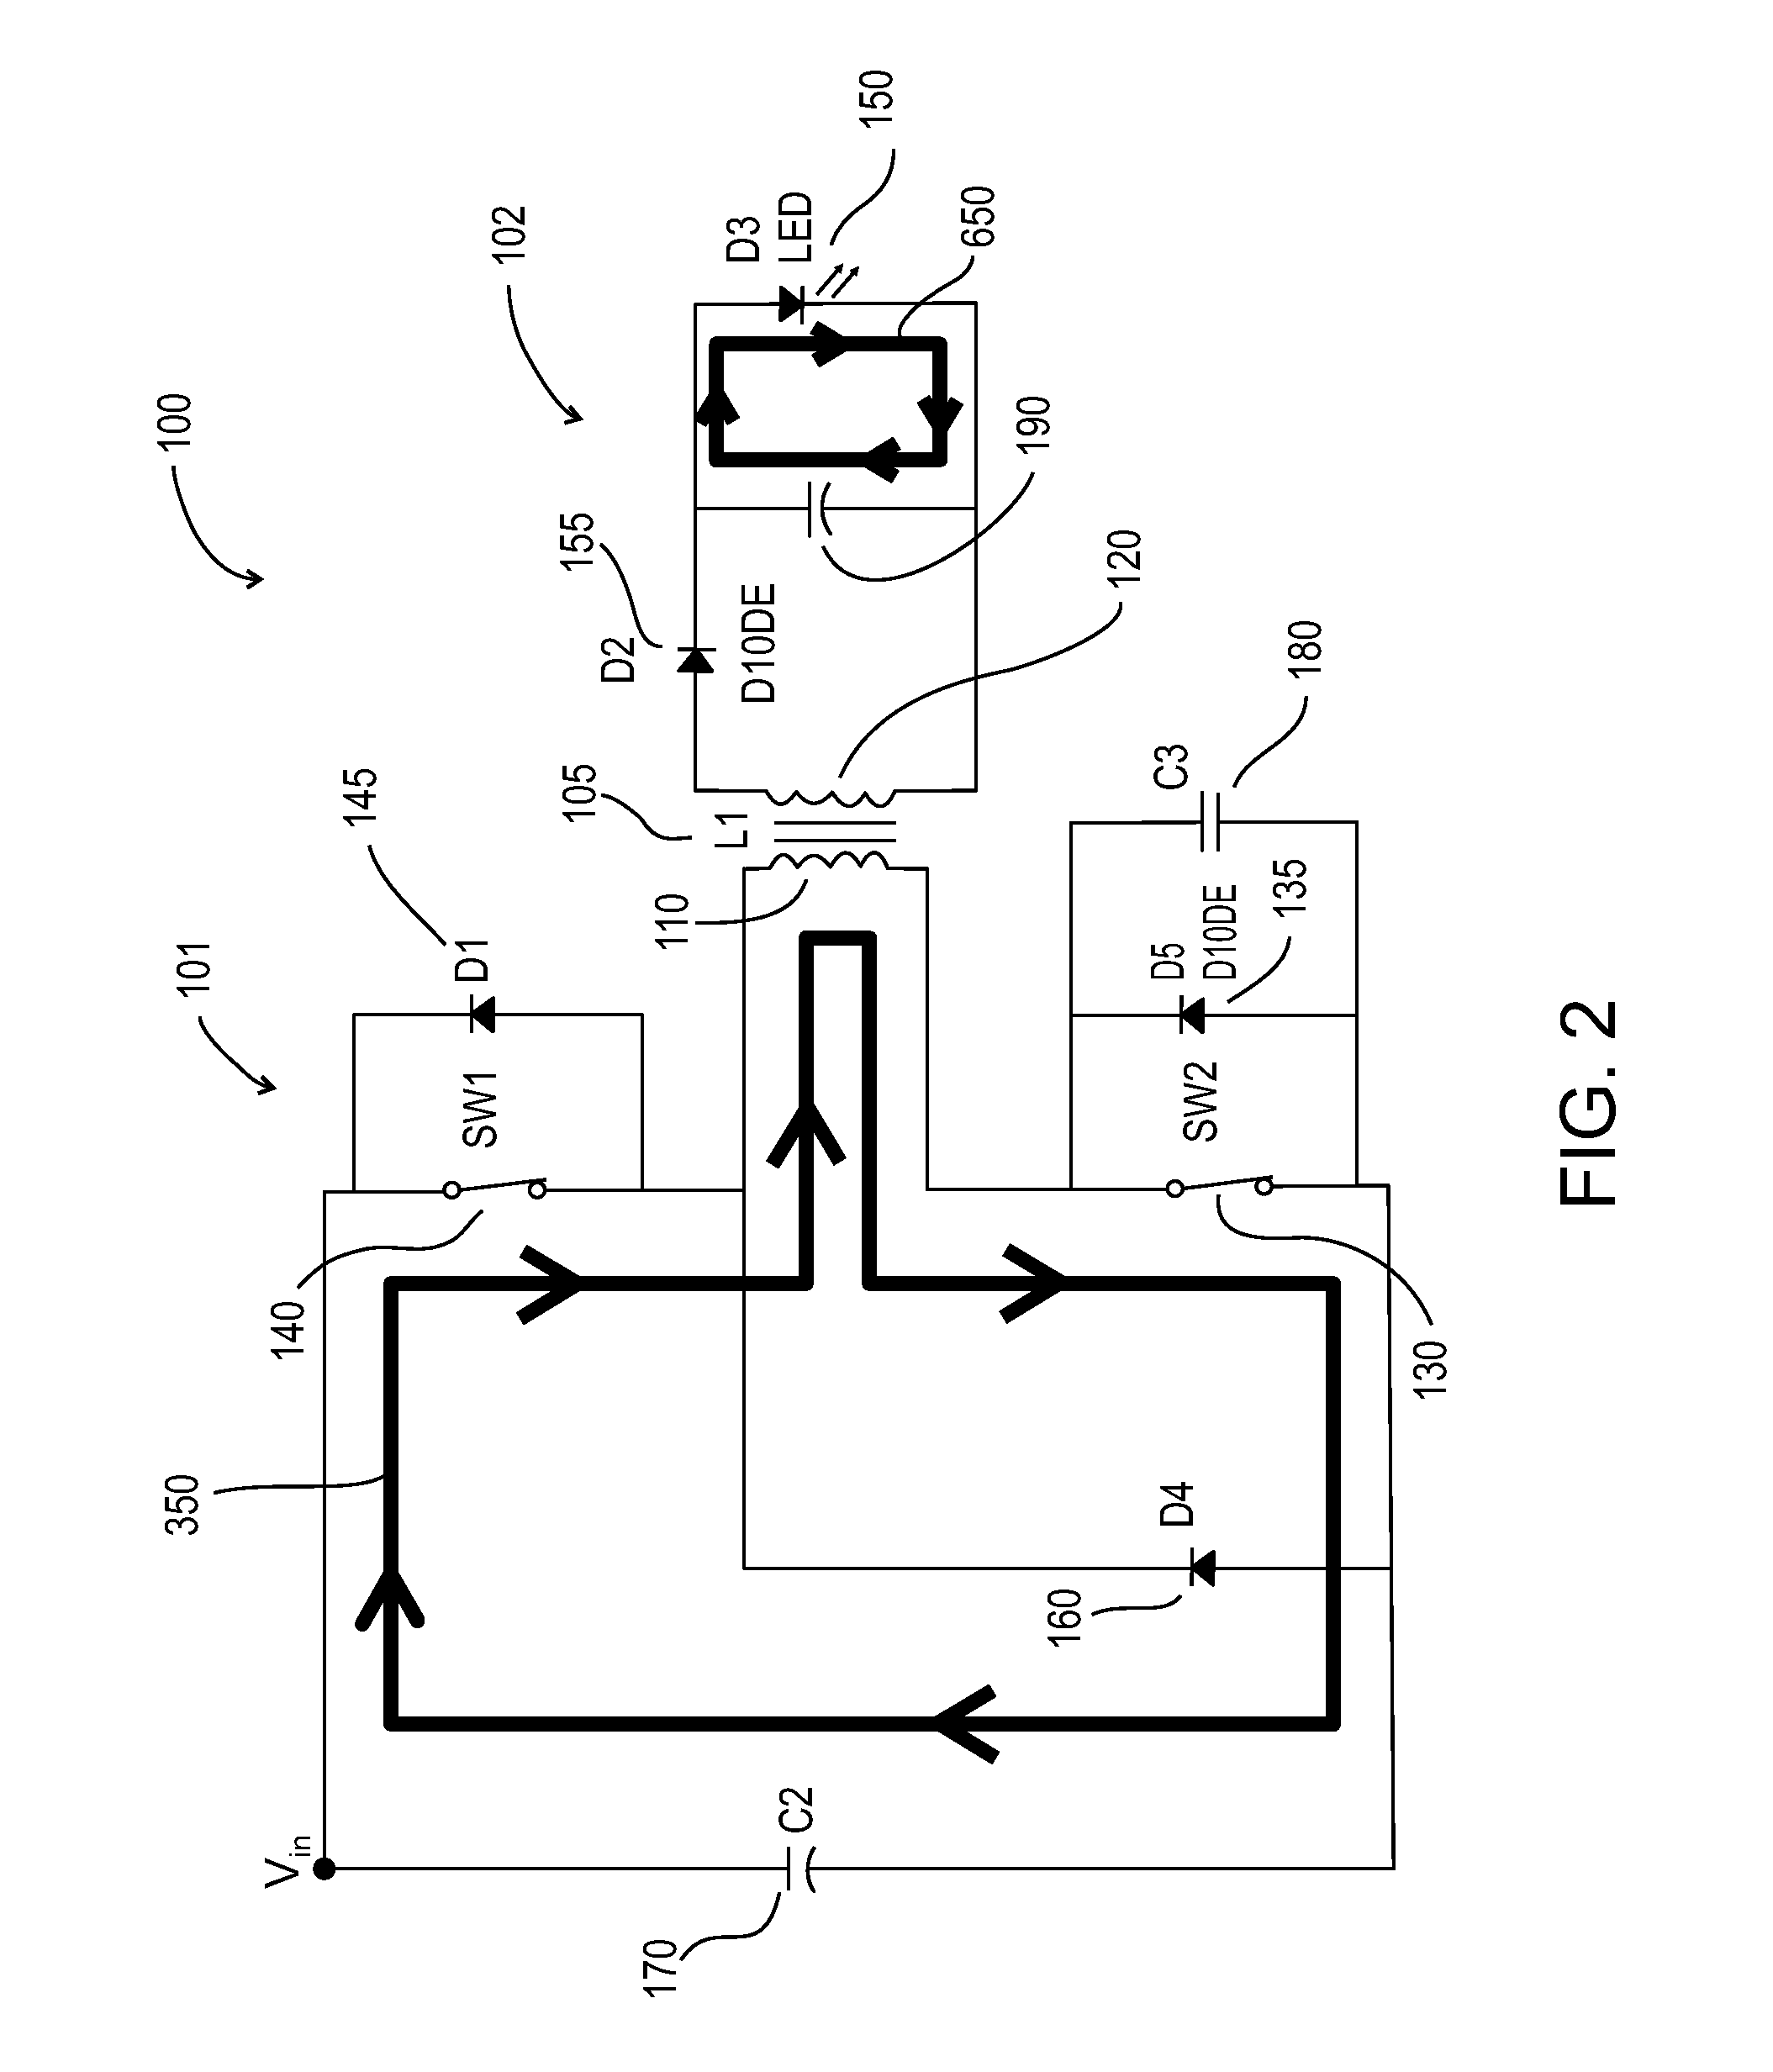 Resonant fly-back power converter and LED lighting unit powered therefrom